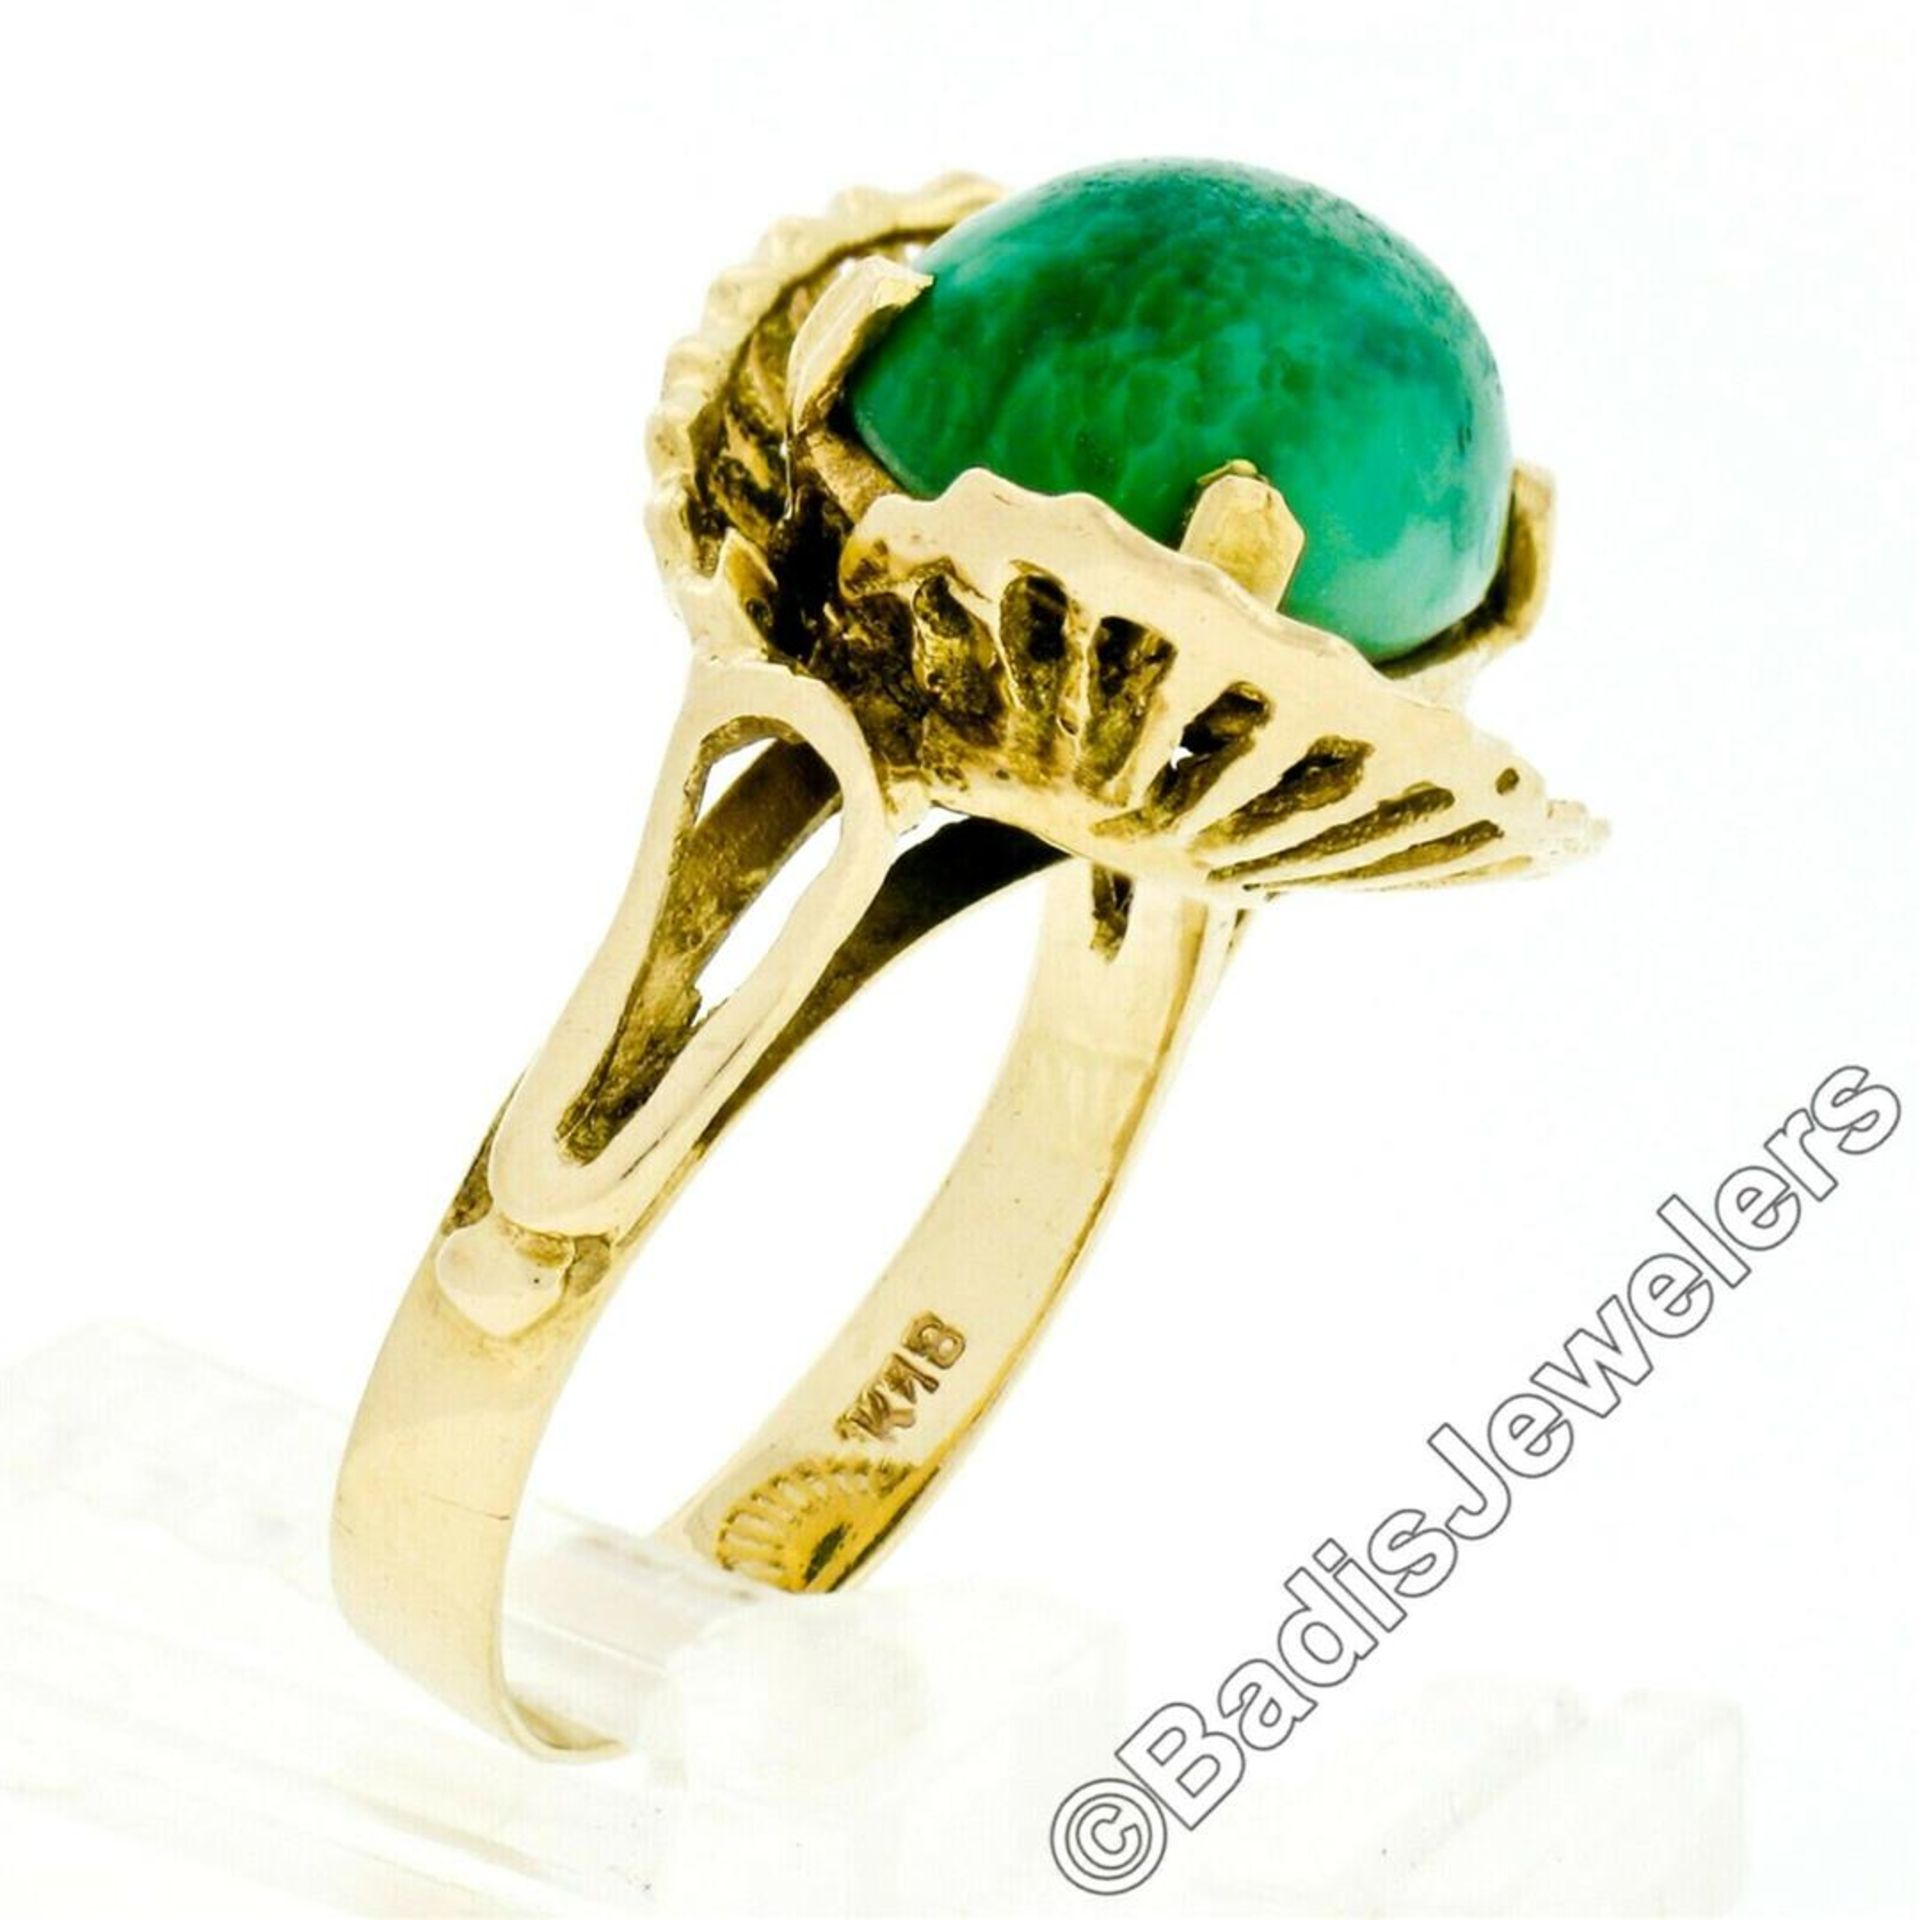 Vintage Handmade 18kt Yellow Gold Oval Jade Solitaire Ring - Image 6 of 8